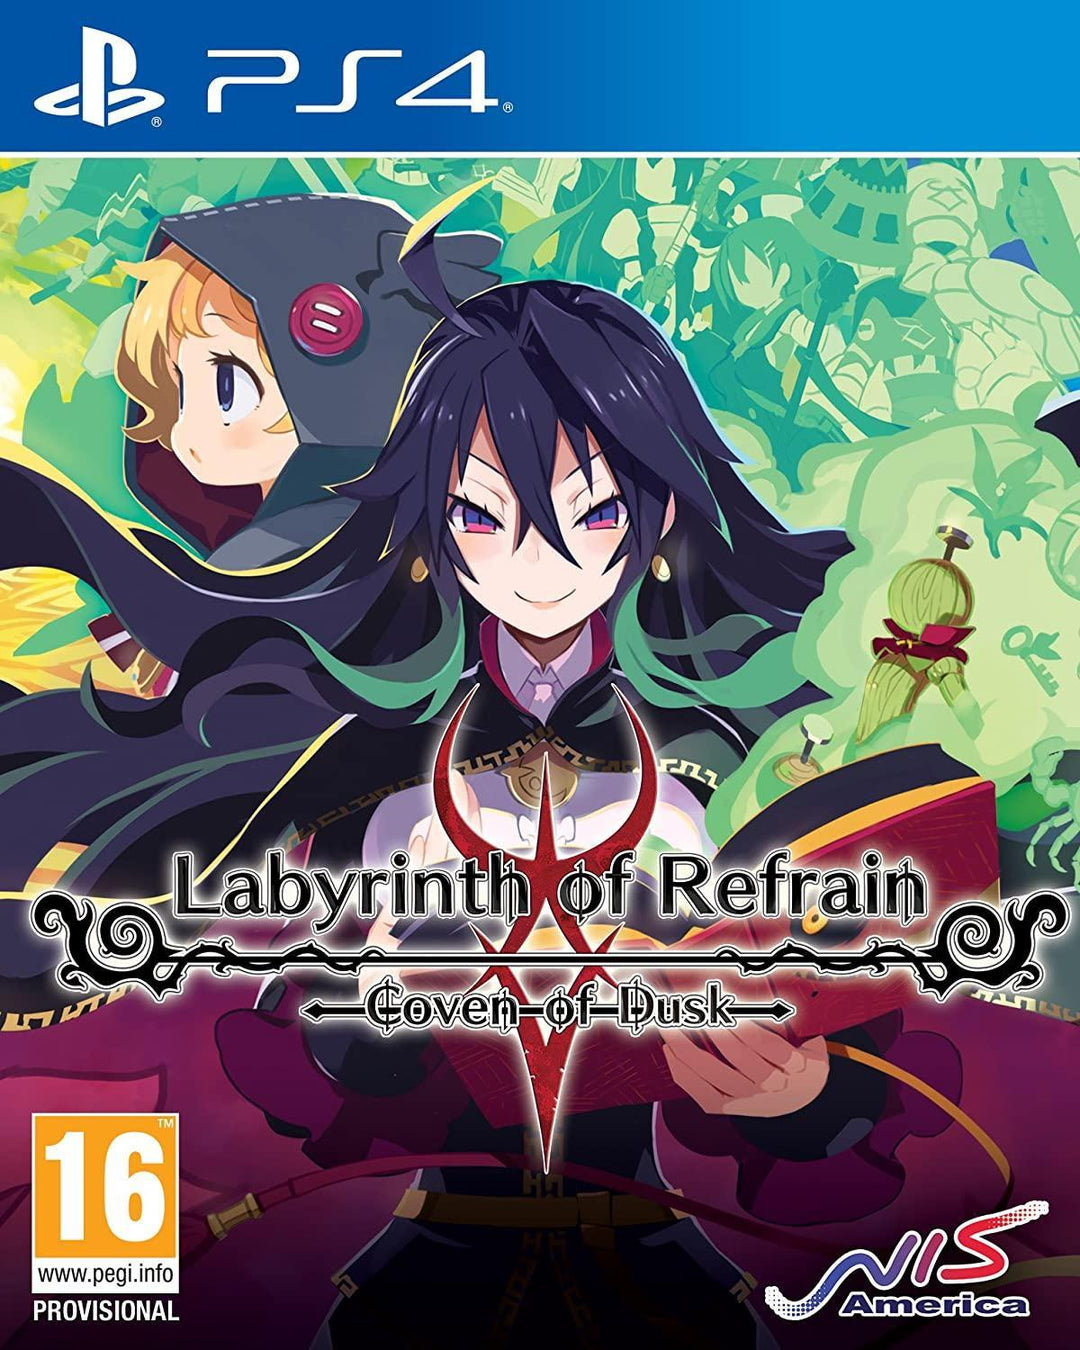 Labyrinth of Refrain: Coven of Dusk / PS4 / Playstation 4 - GD Games 